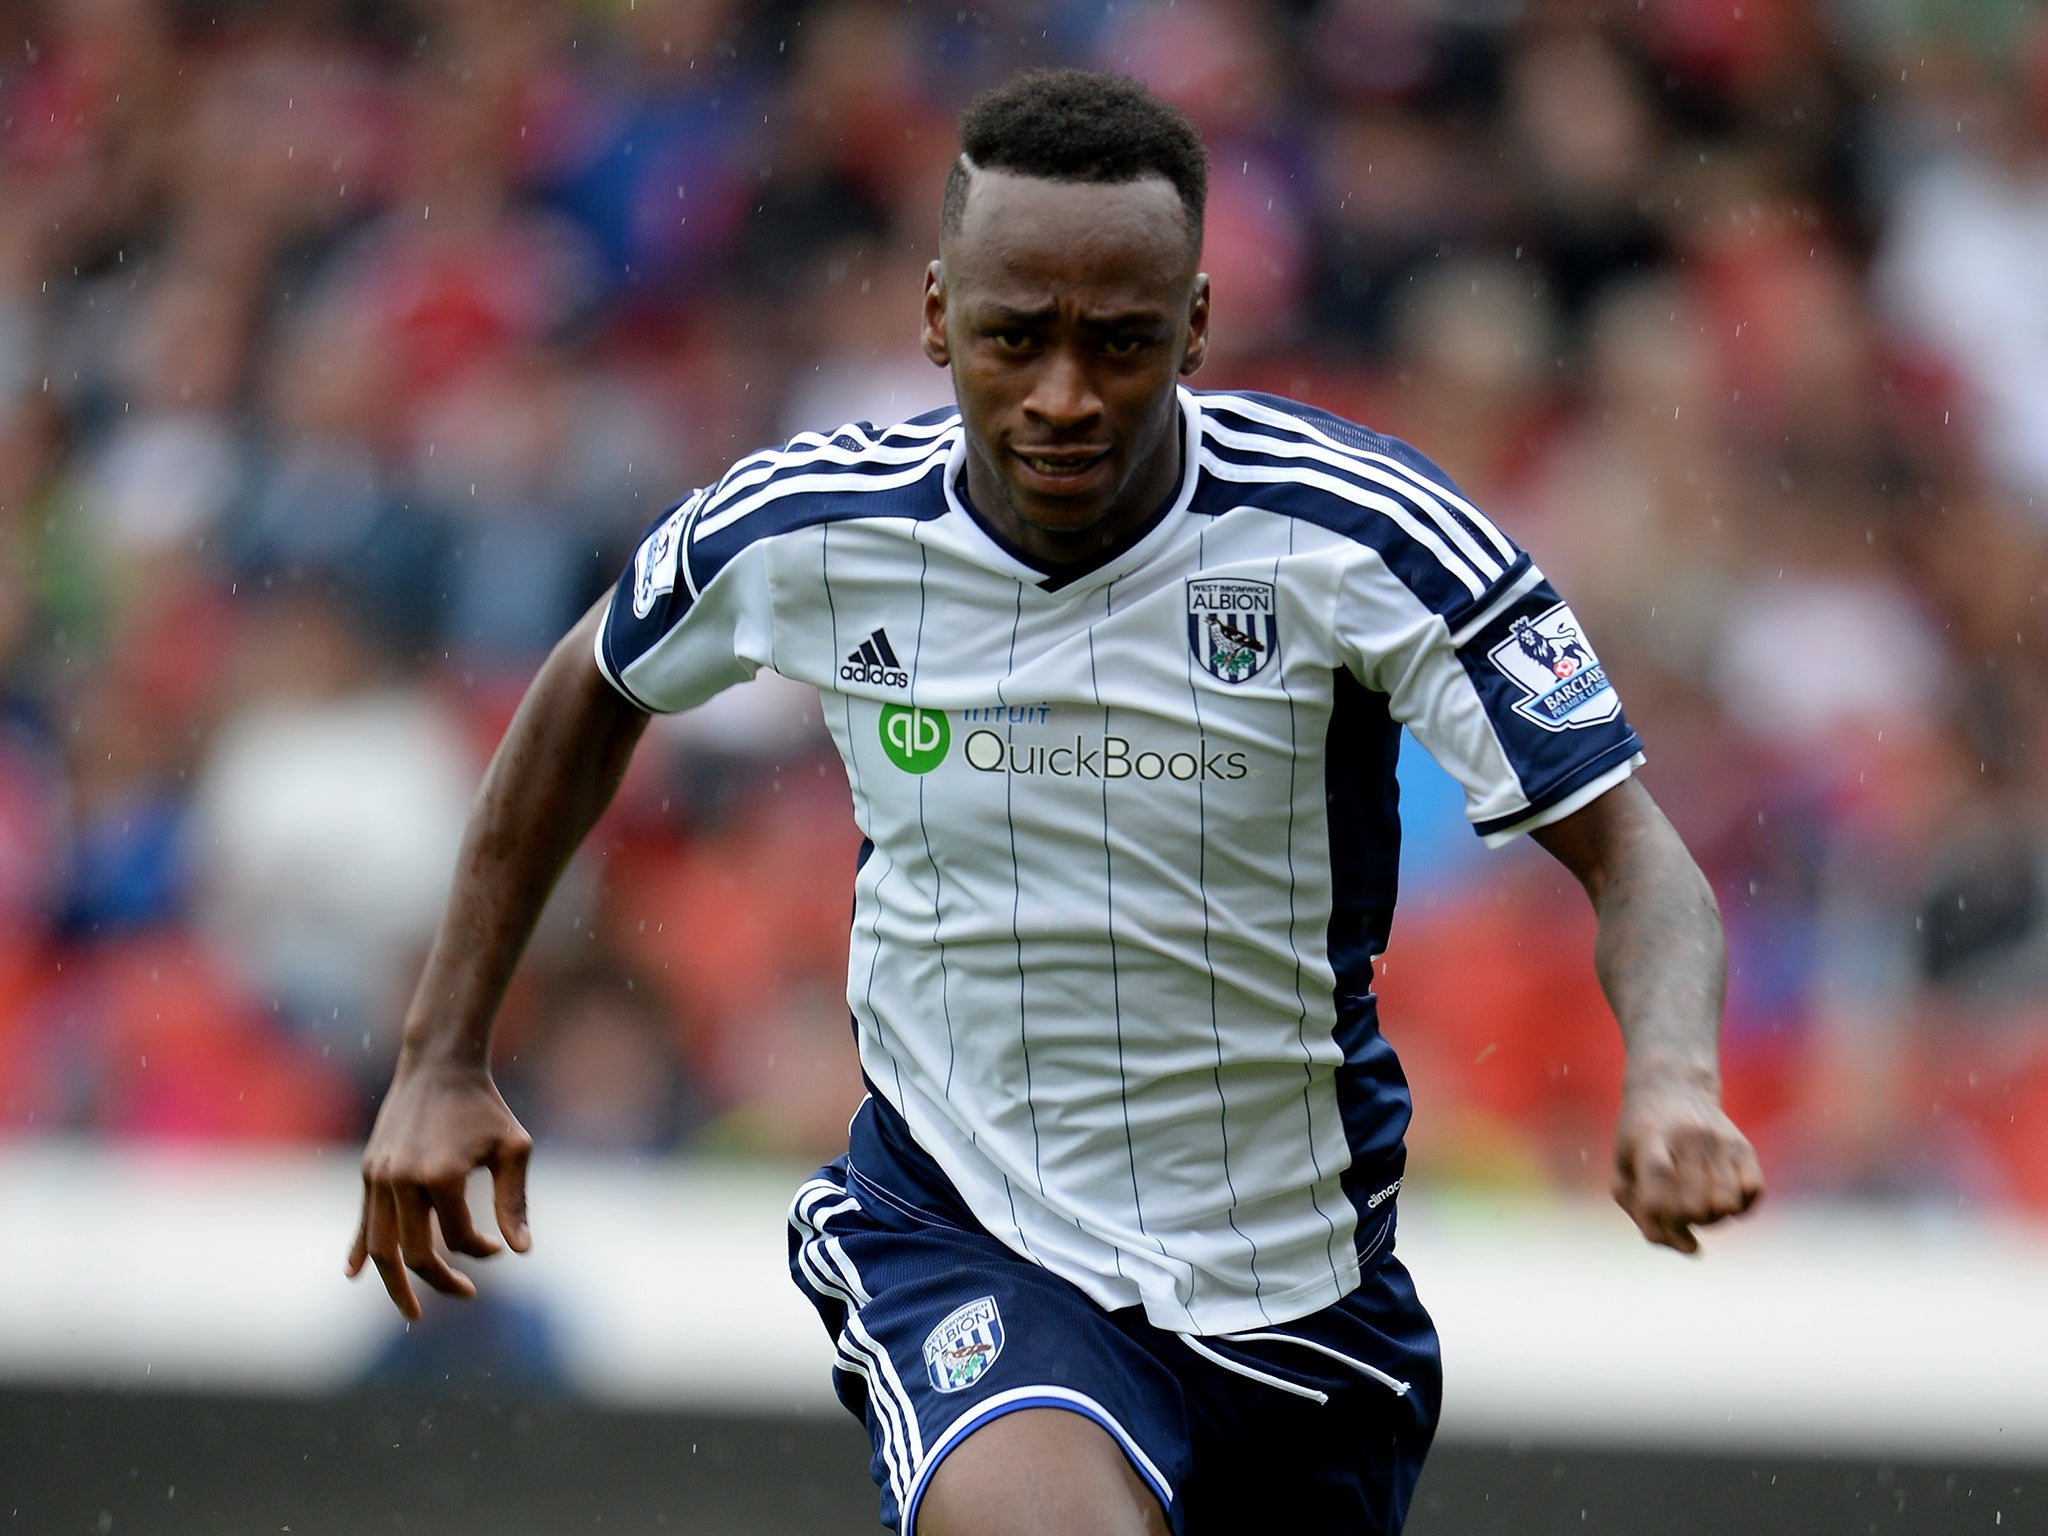 Saido Berahino, 21, has been called up after scoring eight goals for West Bromwich
Albion this season